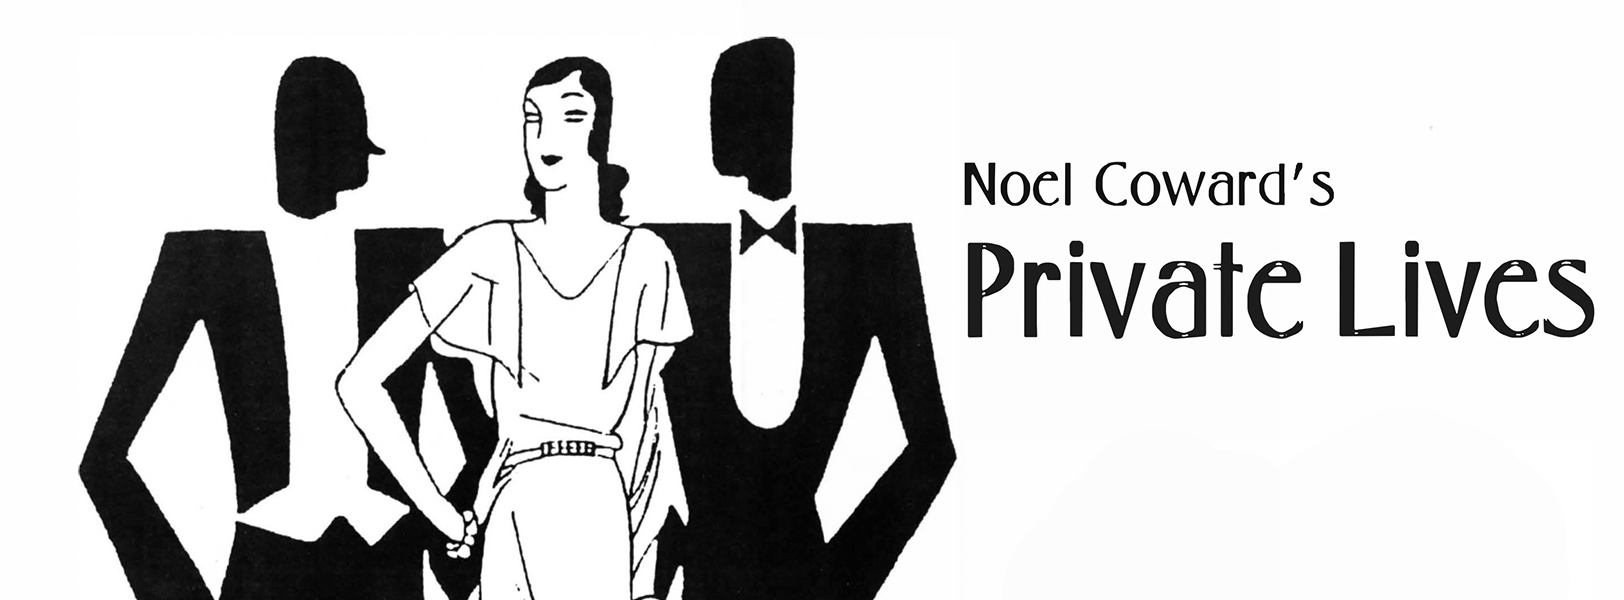 Cover image for Private Lives by Noel Coward